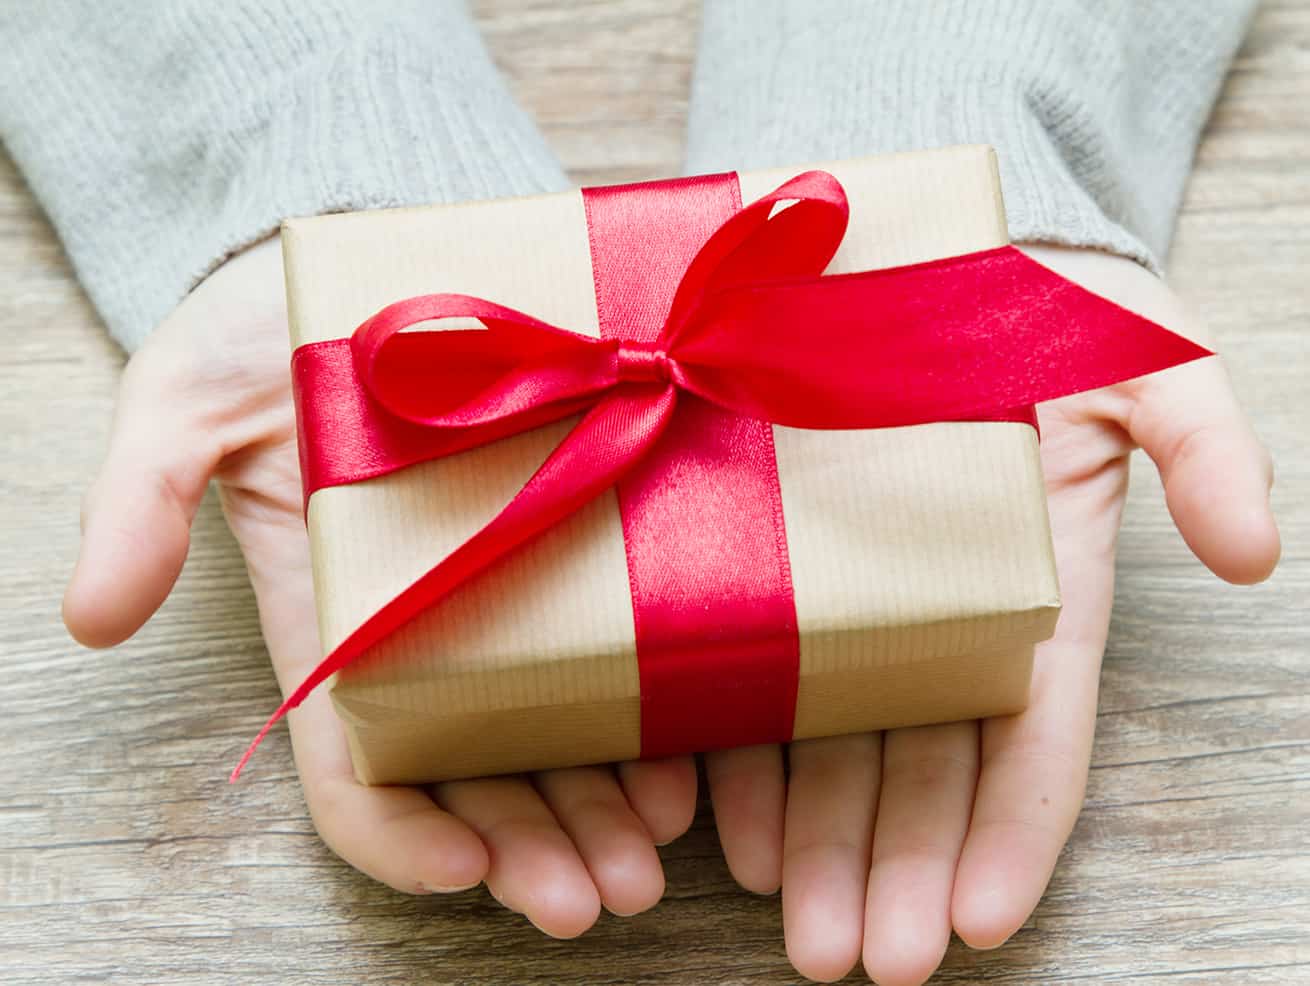 hands holding small Christmas gift in kraft paper and red bow